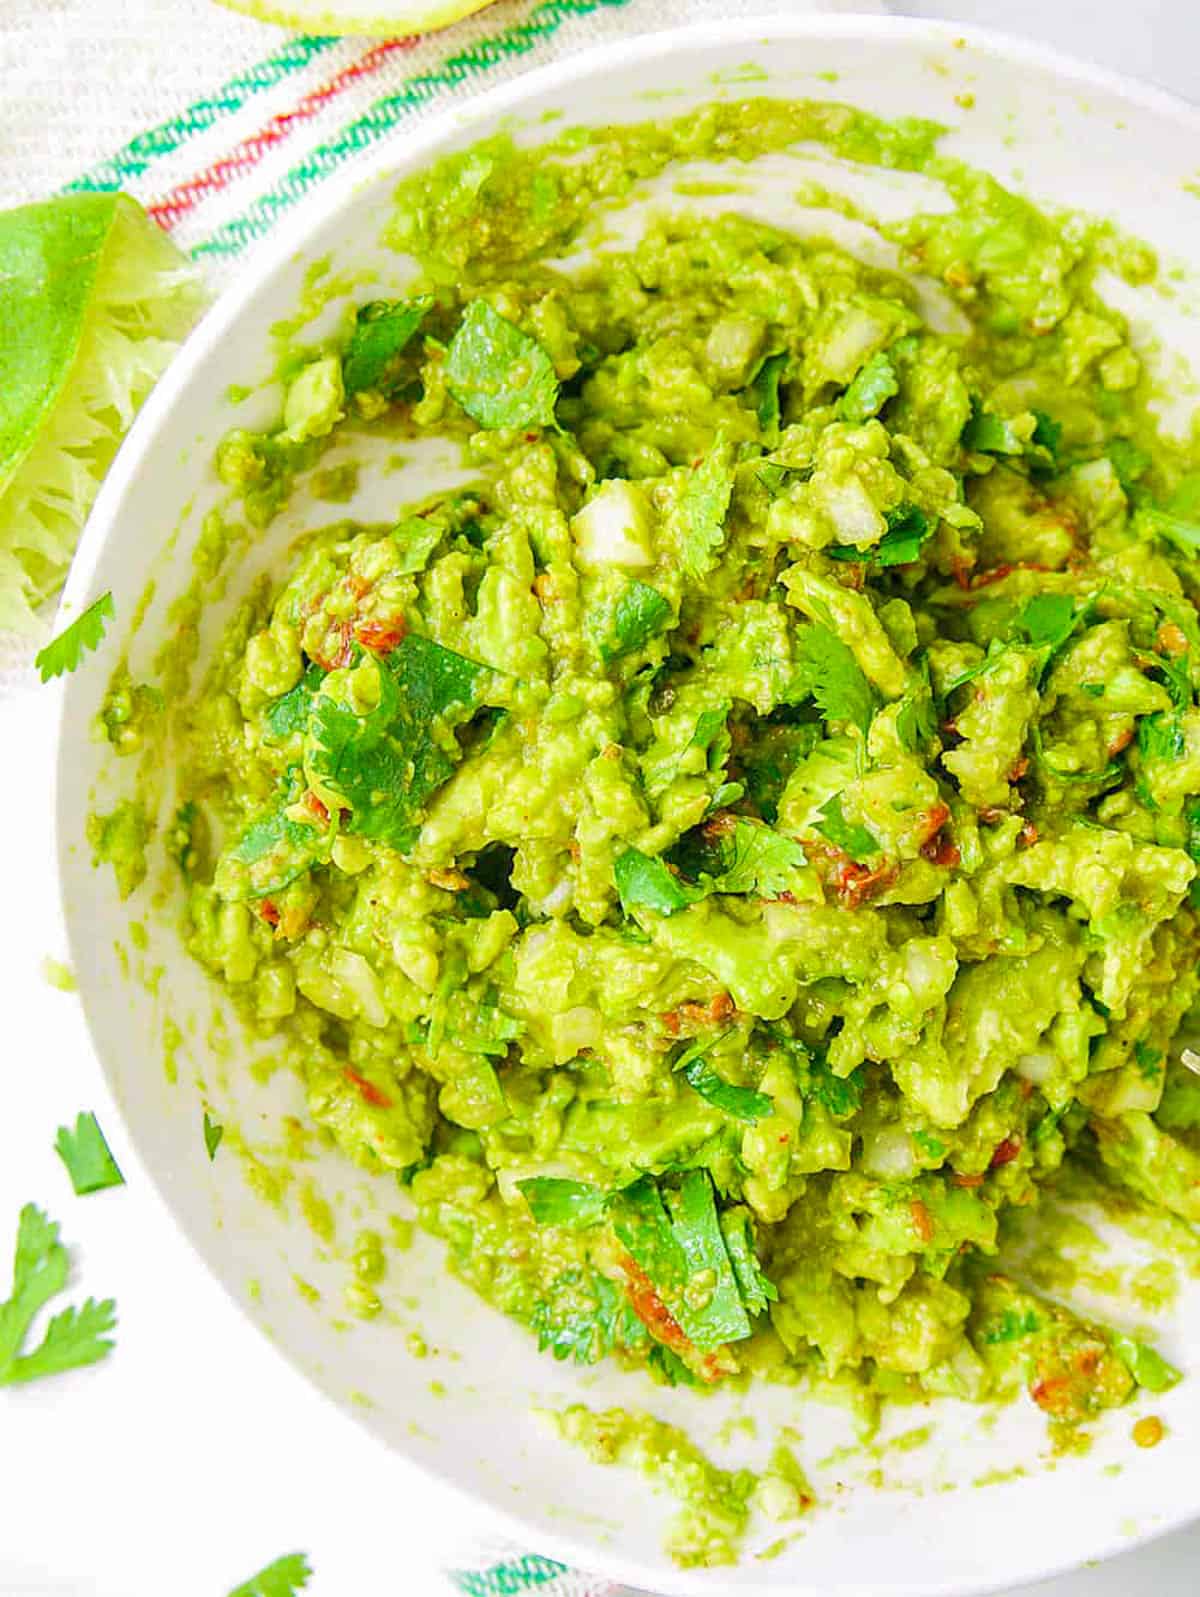 Healthy guacamole served in a bowl with a tortilla chip garnish.